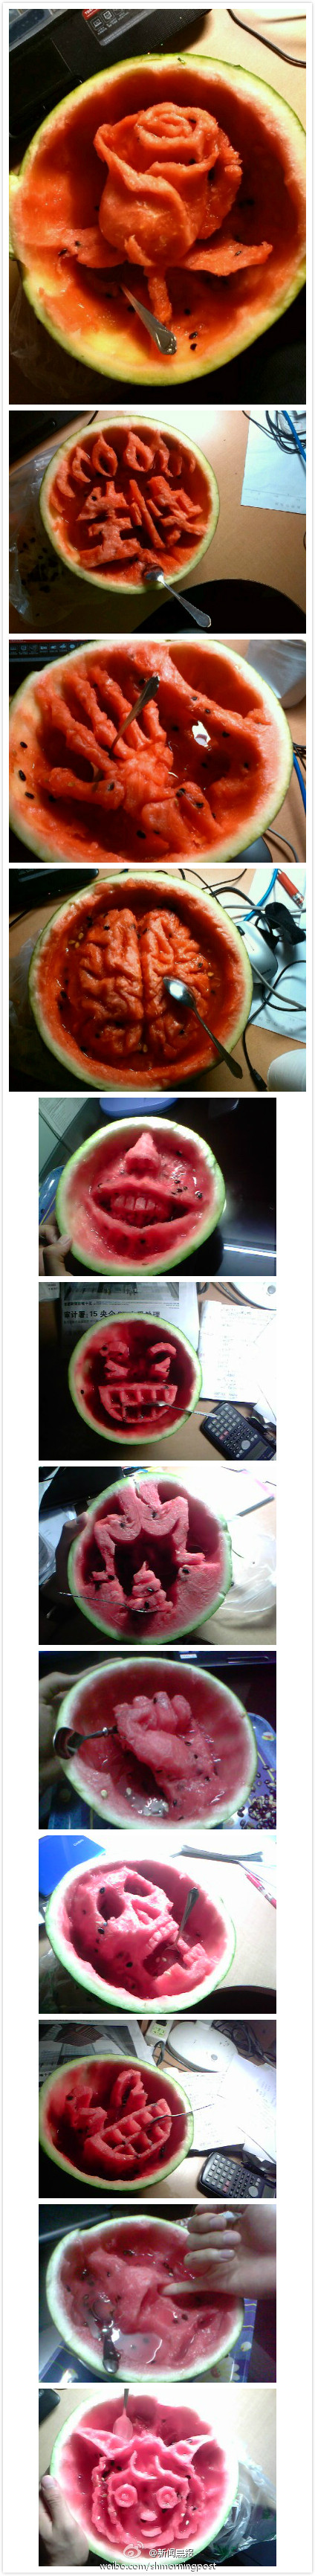 Spectacular-Watermelon-Carving-Photos-a-Tsinghua-Student-Carved-With-a-Spoon.jpg